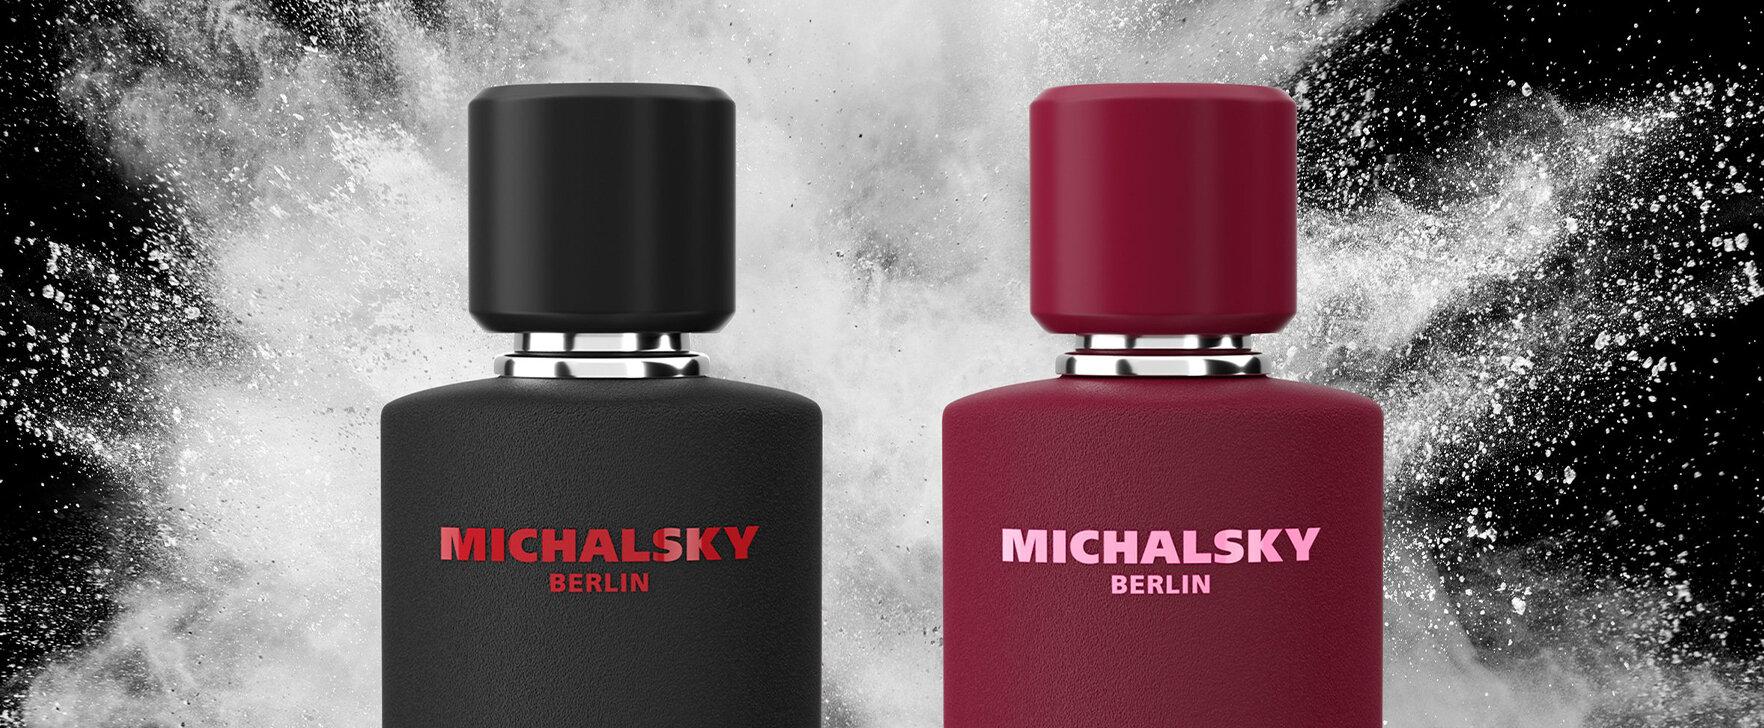 "Private for Women" and "Private for Men": The New Michalsky Fragrance Duo